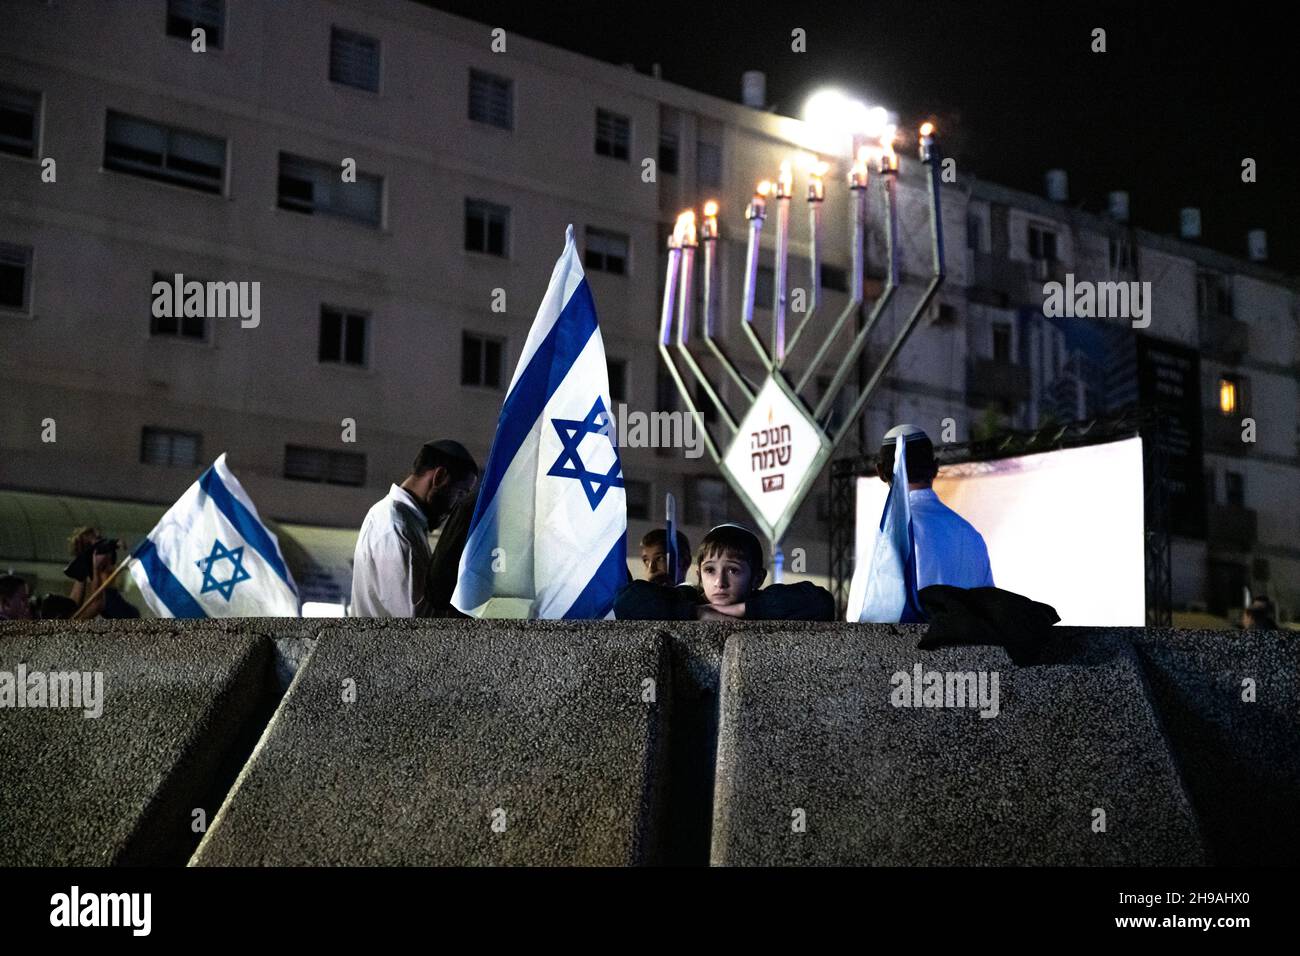 Lod, Israel. Dec 5th 2021, Israeli religious right wing public marches with flags through the mixed city of Lod, celebrating the last candle of the holiday of Hanukkah. The event was organized by religious zionist groups, some of them percived as radical in Israel, aiming to expand the jewish present within the country. The city of Lod is populated by both Jewish and Muslim, which used to live in peace until the arrival of a “Torah Nucleus” into the city. Credit: Matan Golan/Alamy Live News Stock Photo